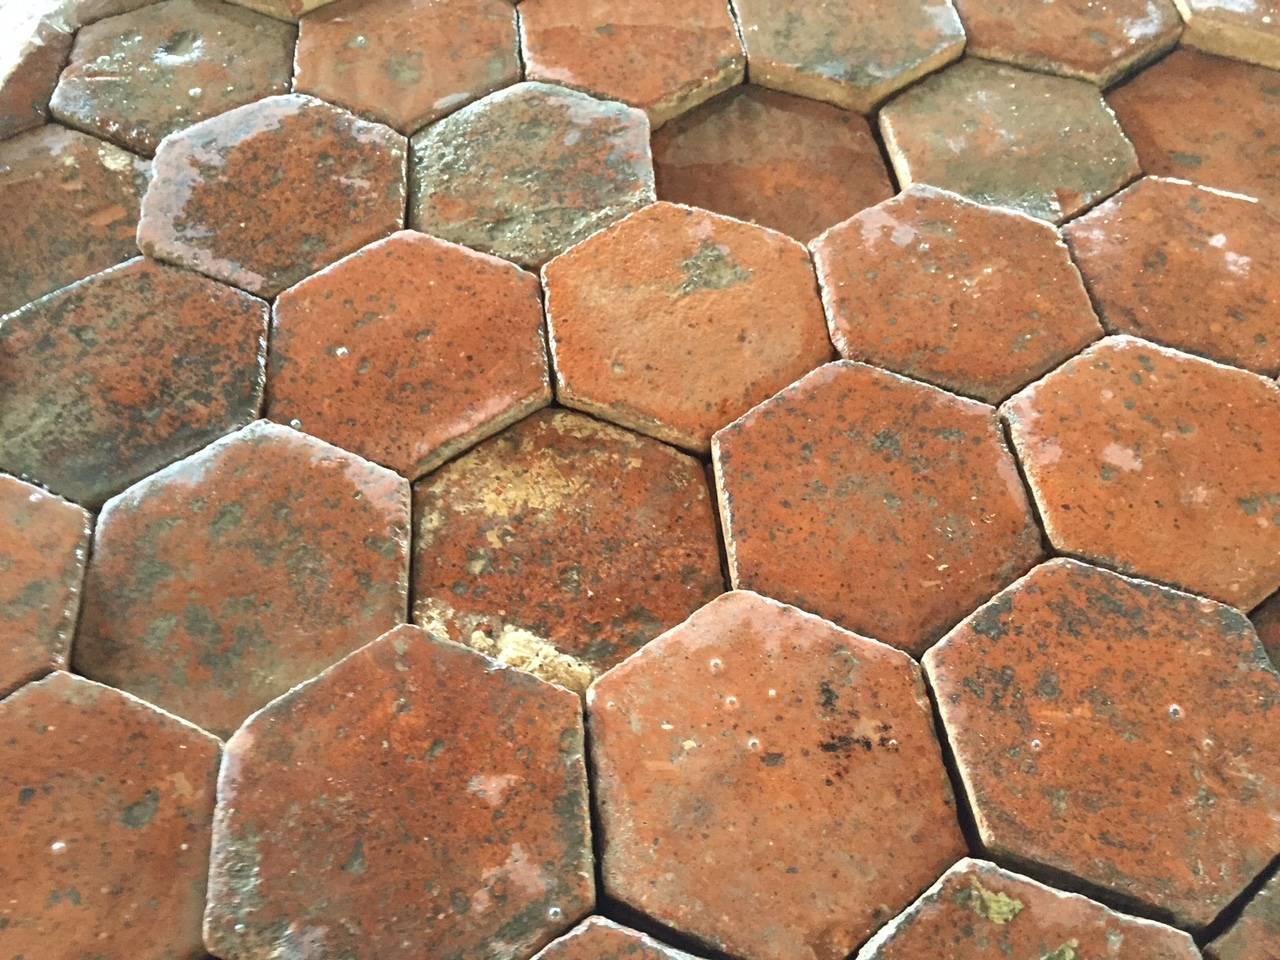 Unique French antique hexagonal terracotta flooring from the 19th century.
Some tiles have the stamp of the original factory from this period of France.

Each tile has been hand-selected and cleaned, ready for installation.
All packed in NIMP15